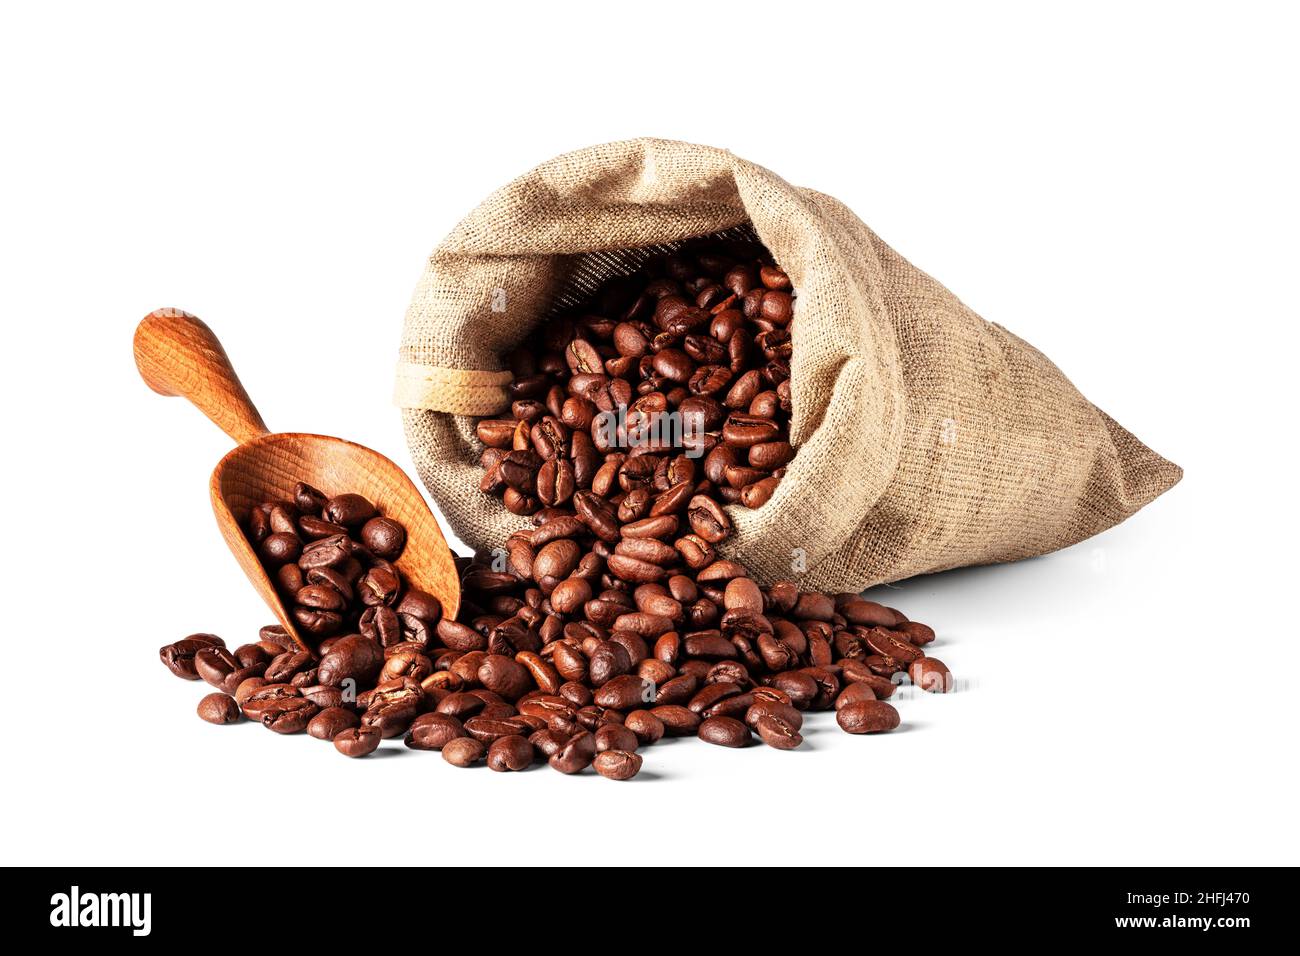 Burlap bag with coffee beans and wood scoop isolated on white background Stock Photo